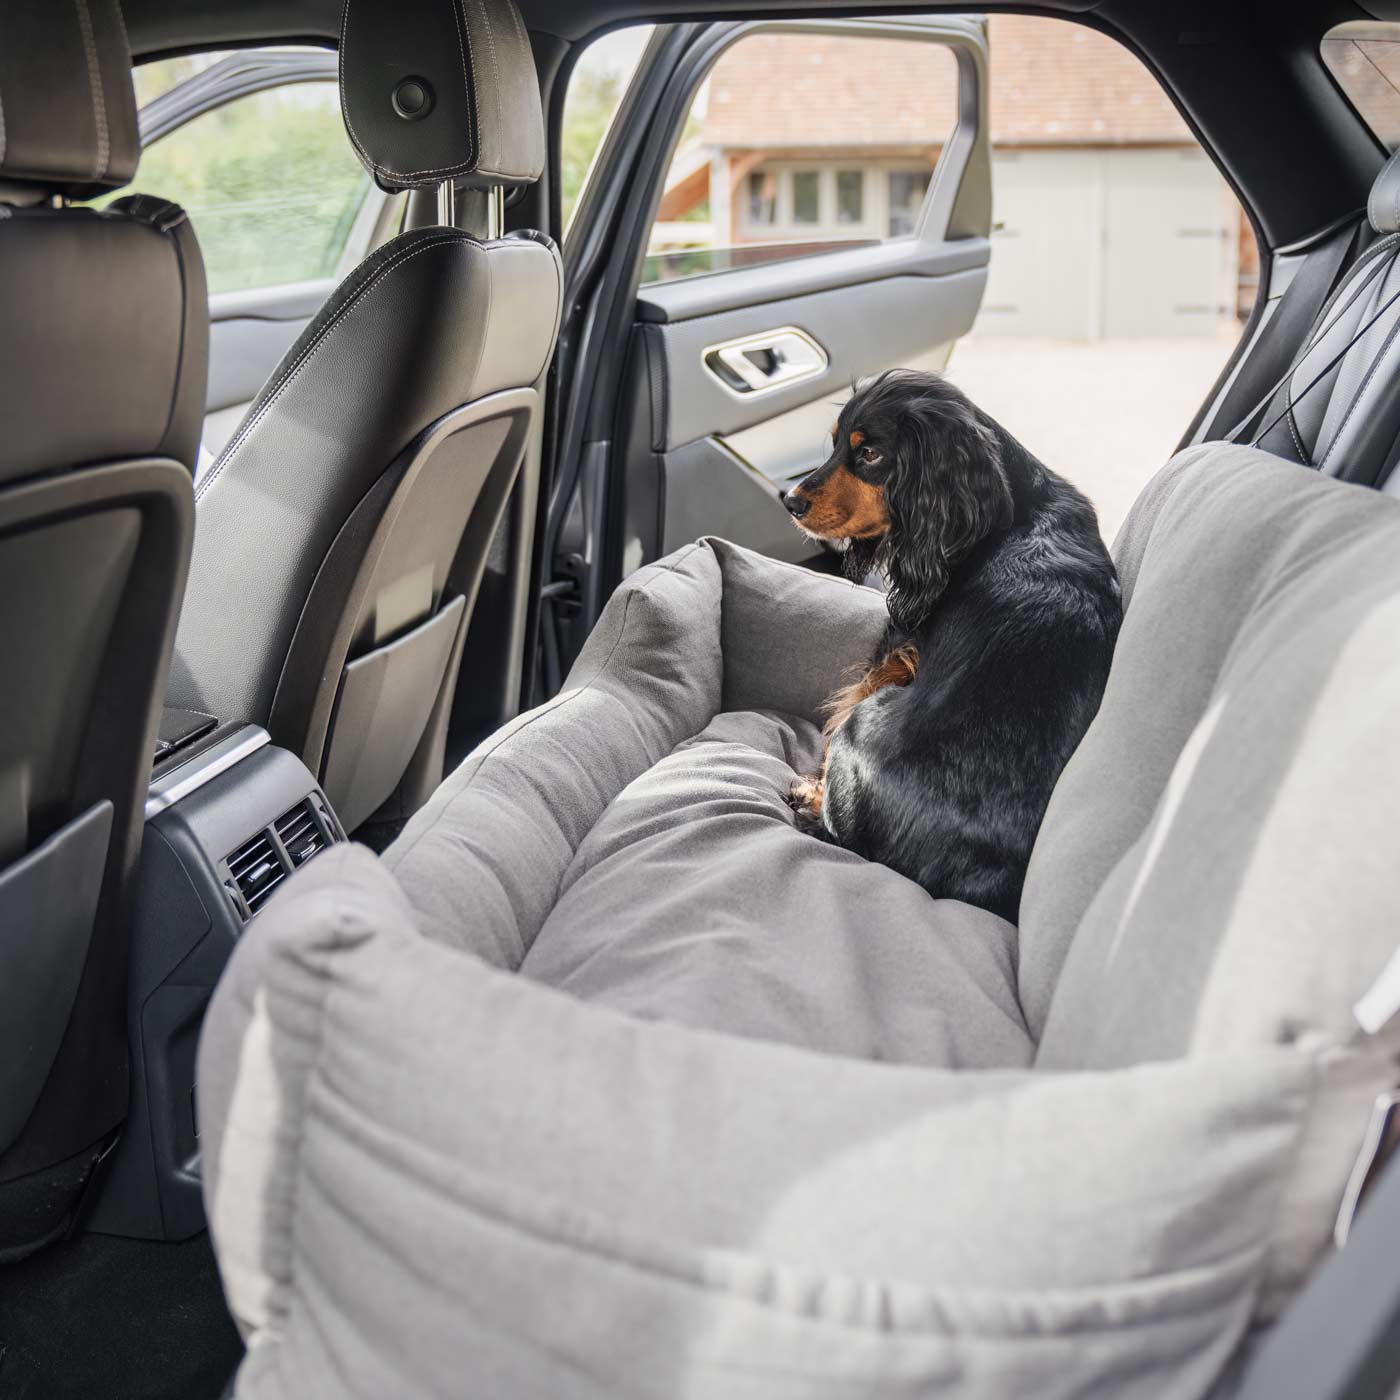 Embark on the perfect pet travel with our luxury Double Easy Traveller Seat, in two colors Truffle and Slate! Featuring removable inner cushion with cover for easy cleaning! Available now at Lords & Labradors US